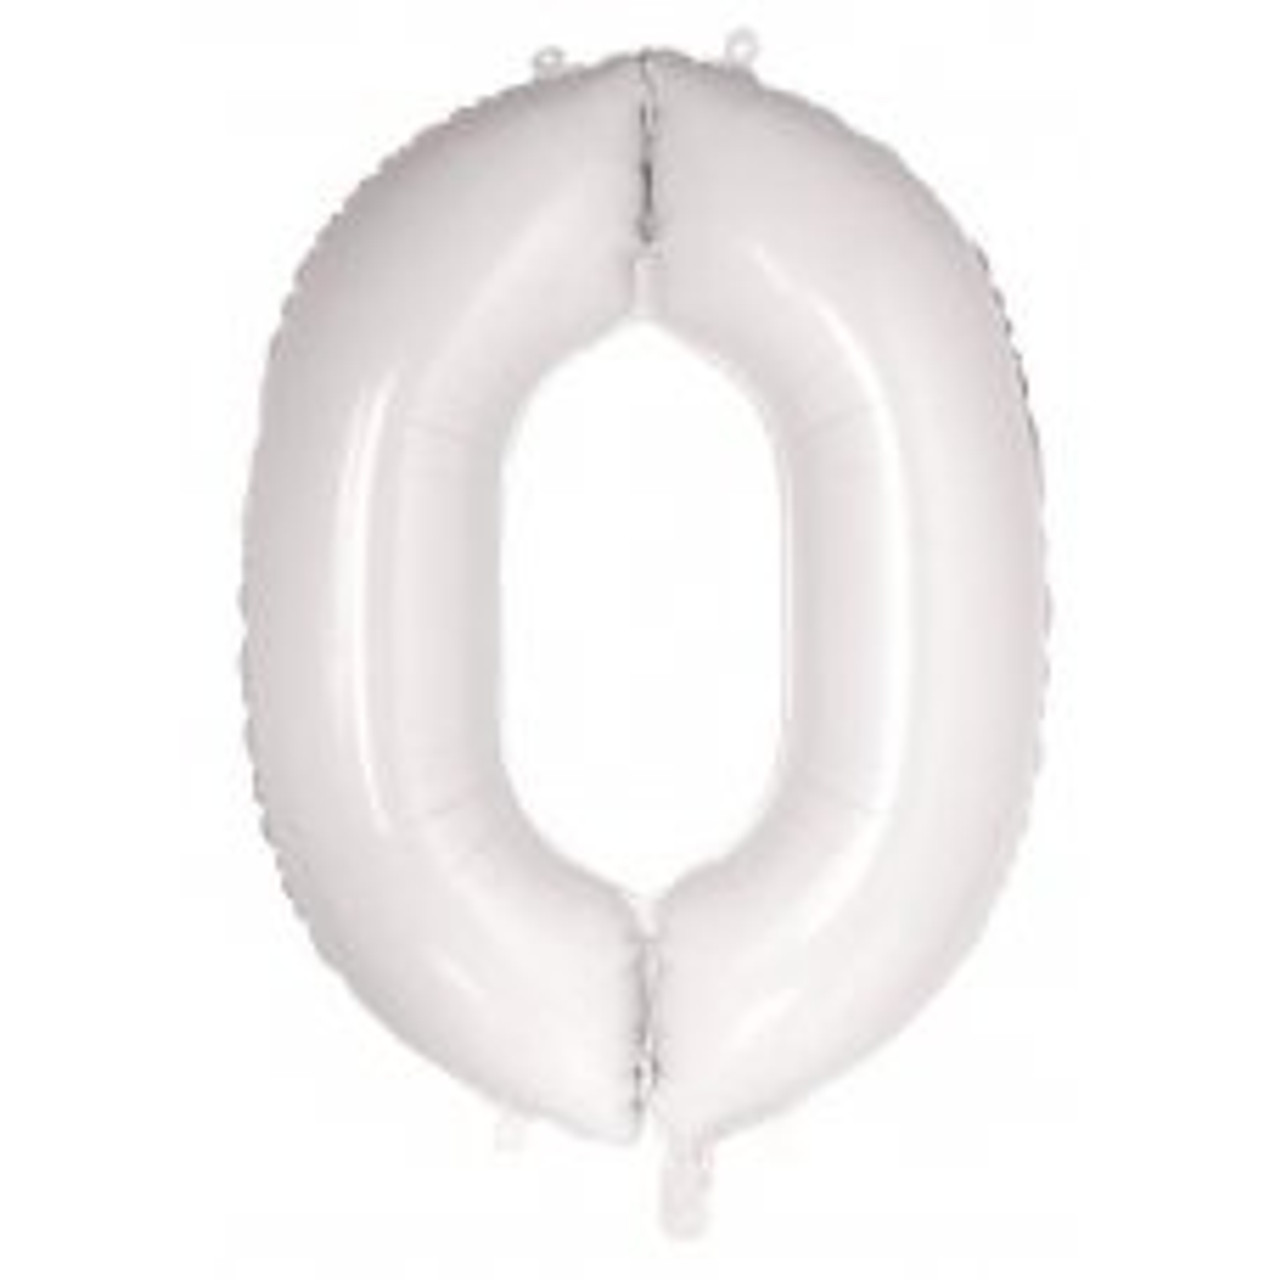 213800 0 NUMERAL WHITE FOIL BALLOON 87CM/34 INCH . INC HELIUM, WEIGHT, RIBBON